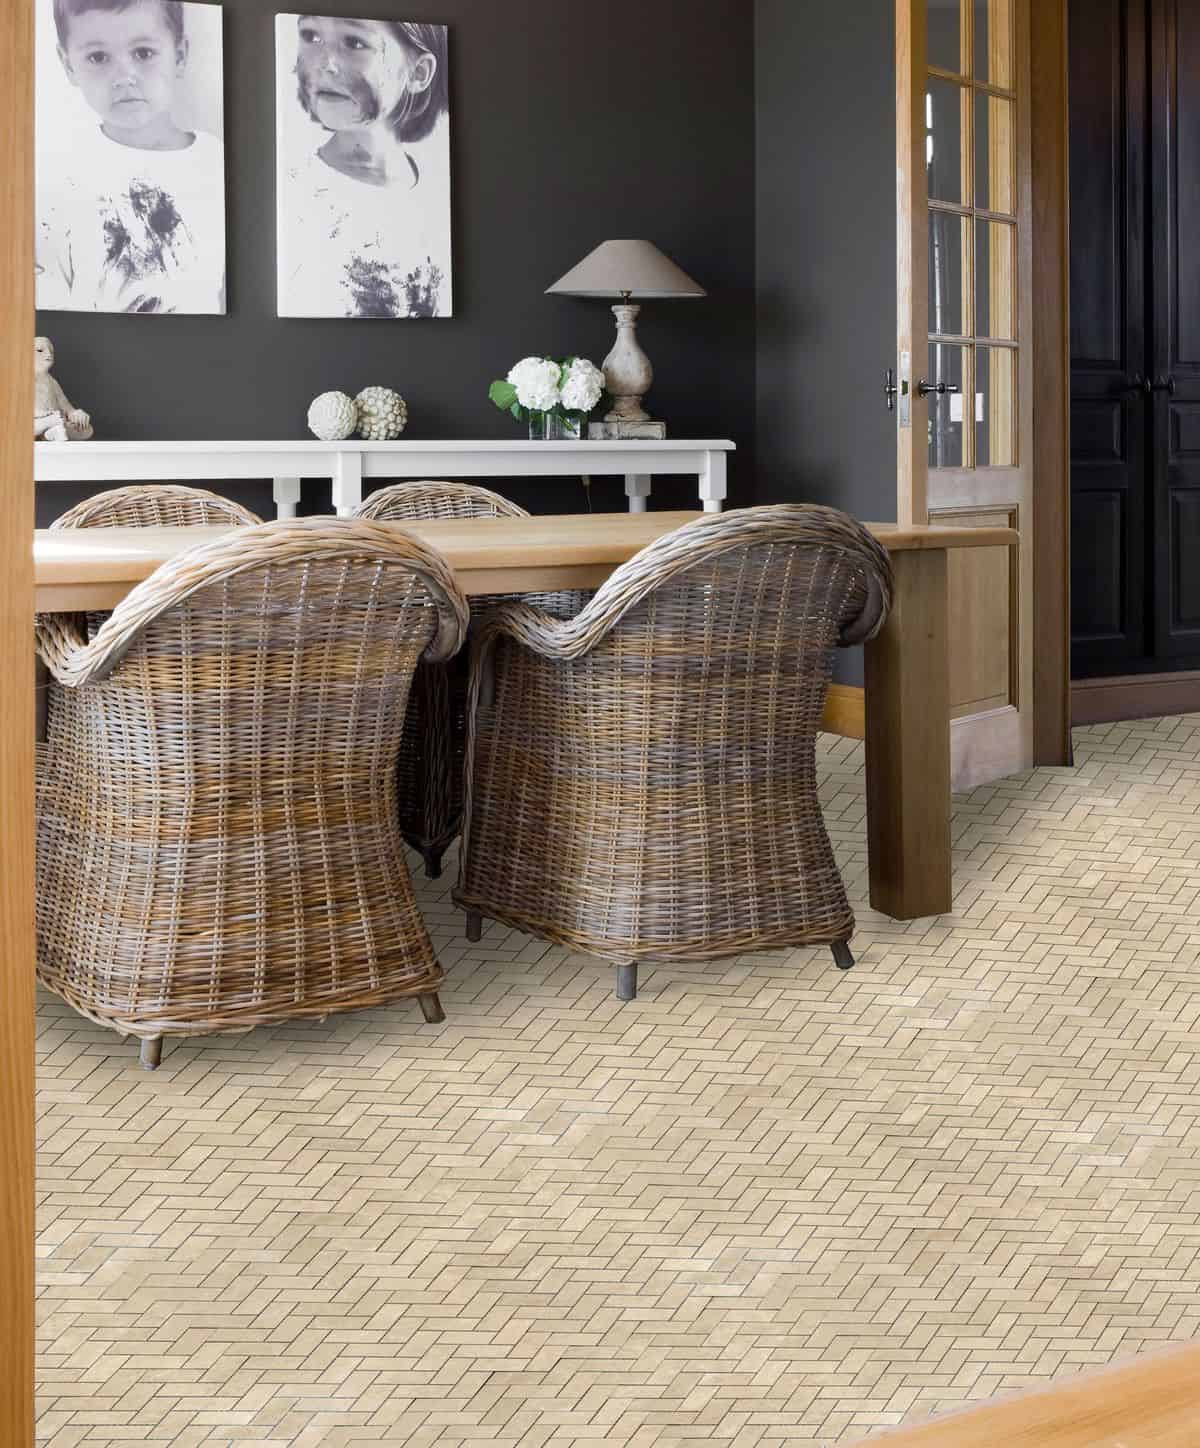 Crested Butte Sisal, Fabric